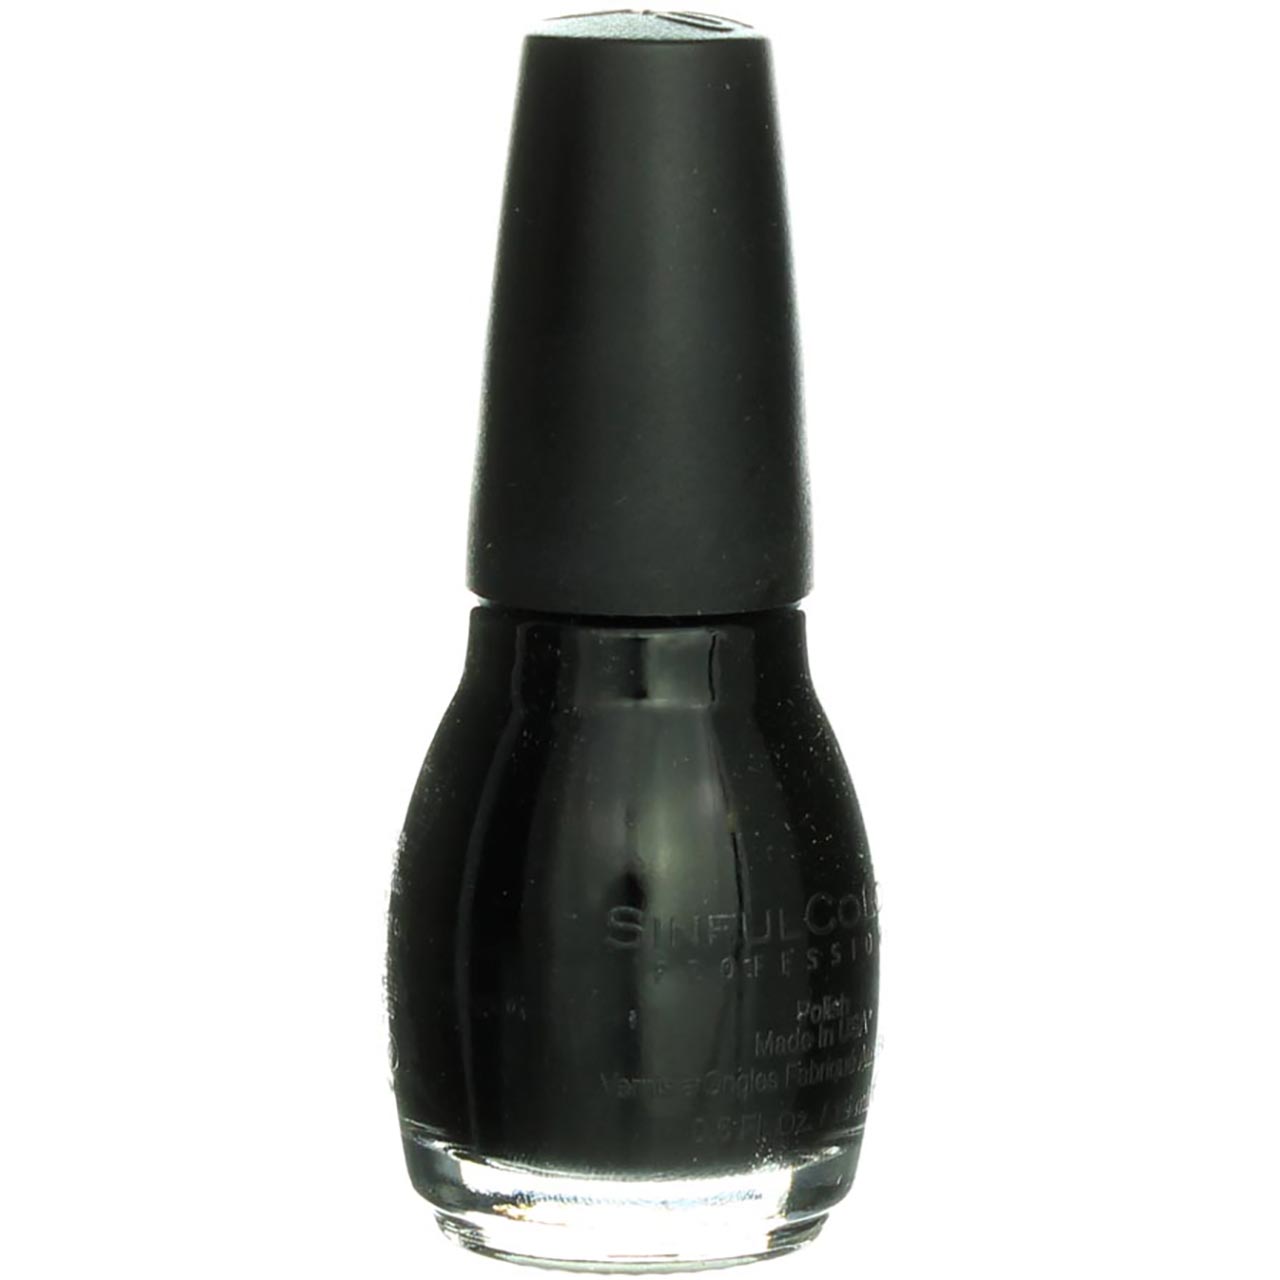 Sinful Colors Professional Nail Enamel, Black On Black 0.50 oz (Pack of 3) - image 2 of 4